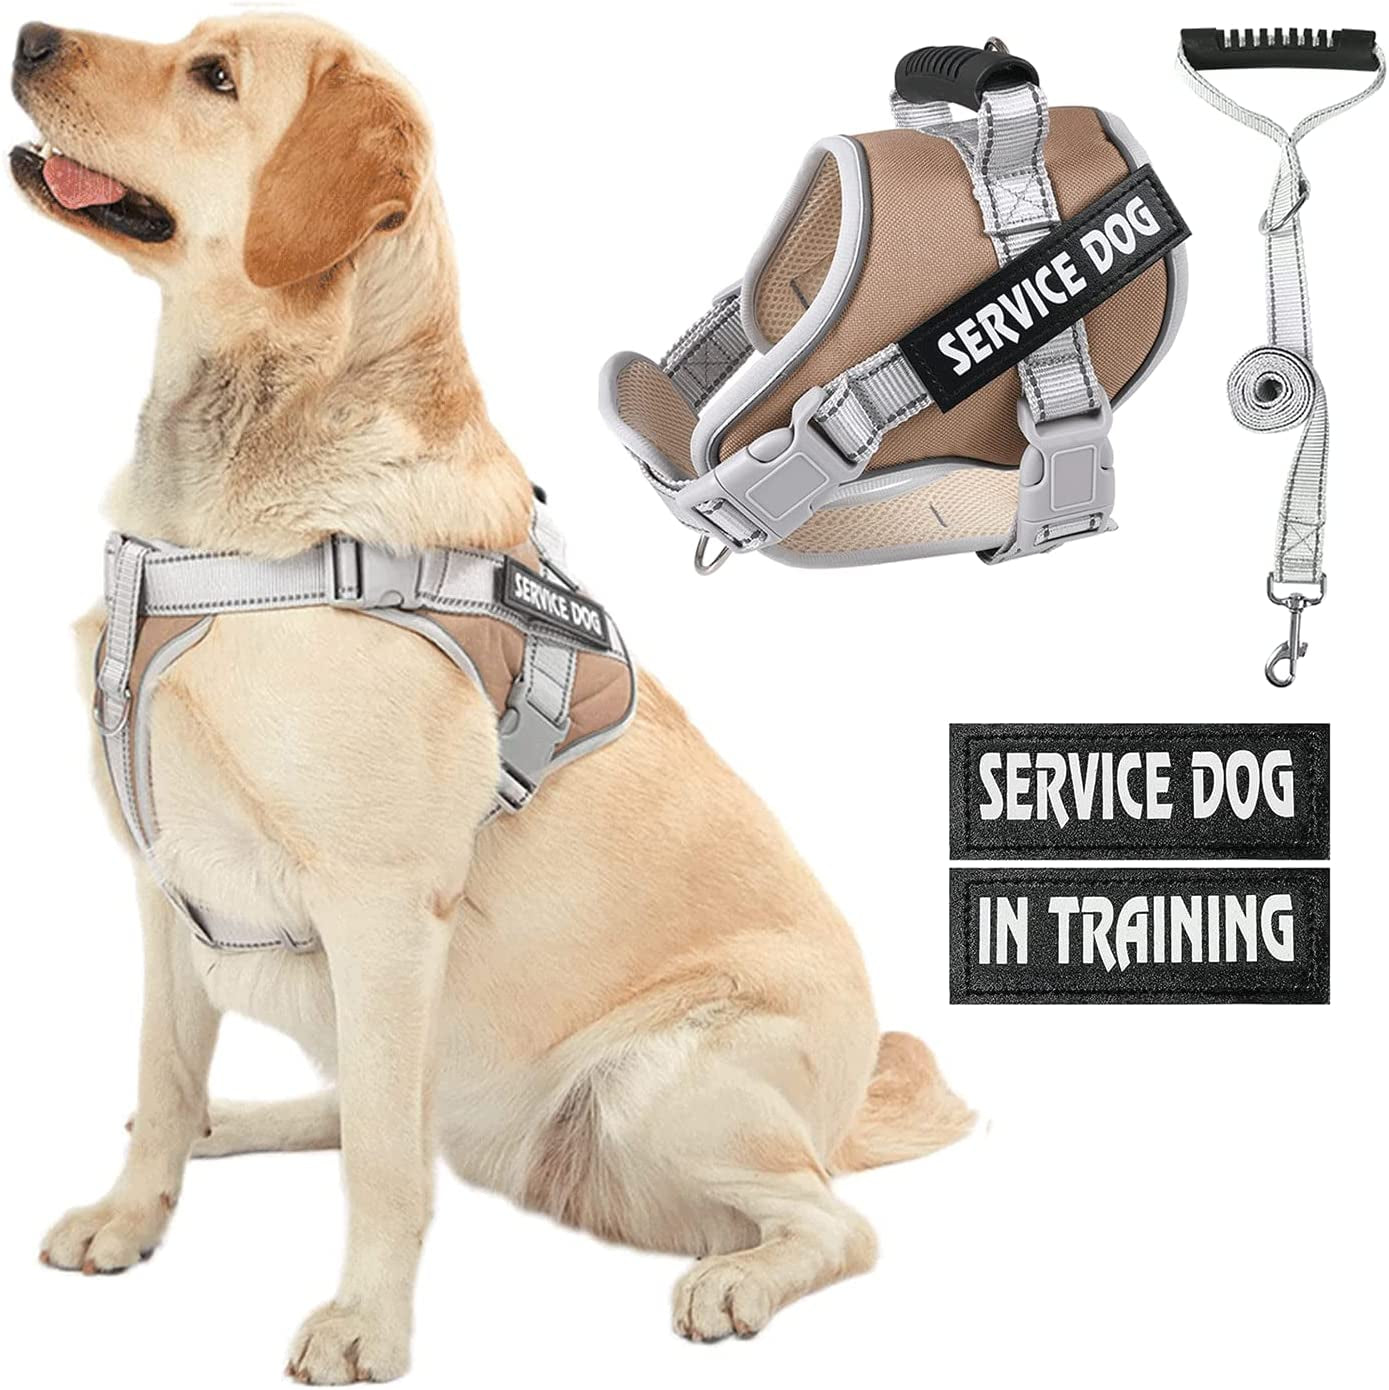 HUSDOW Service Dog Vest Harness, No Pull in Trainning Dog Harnesses with Handle & 5Ft Dog Leash, Adjustable and Reflective No Chock for Small Medum Large Pets Walking and Running(Pink, M)